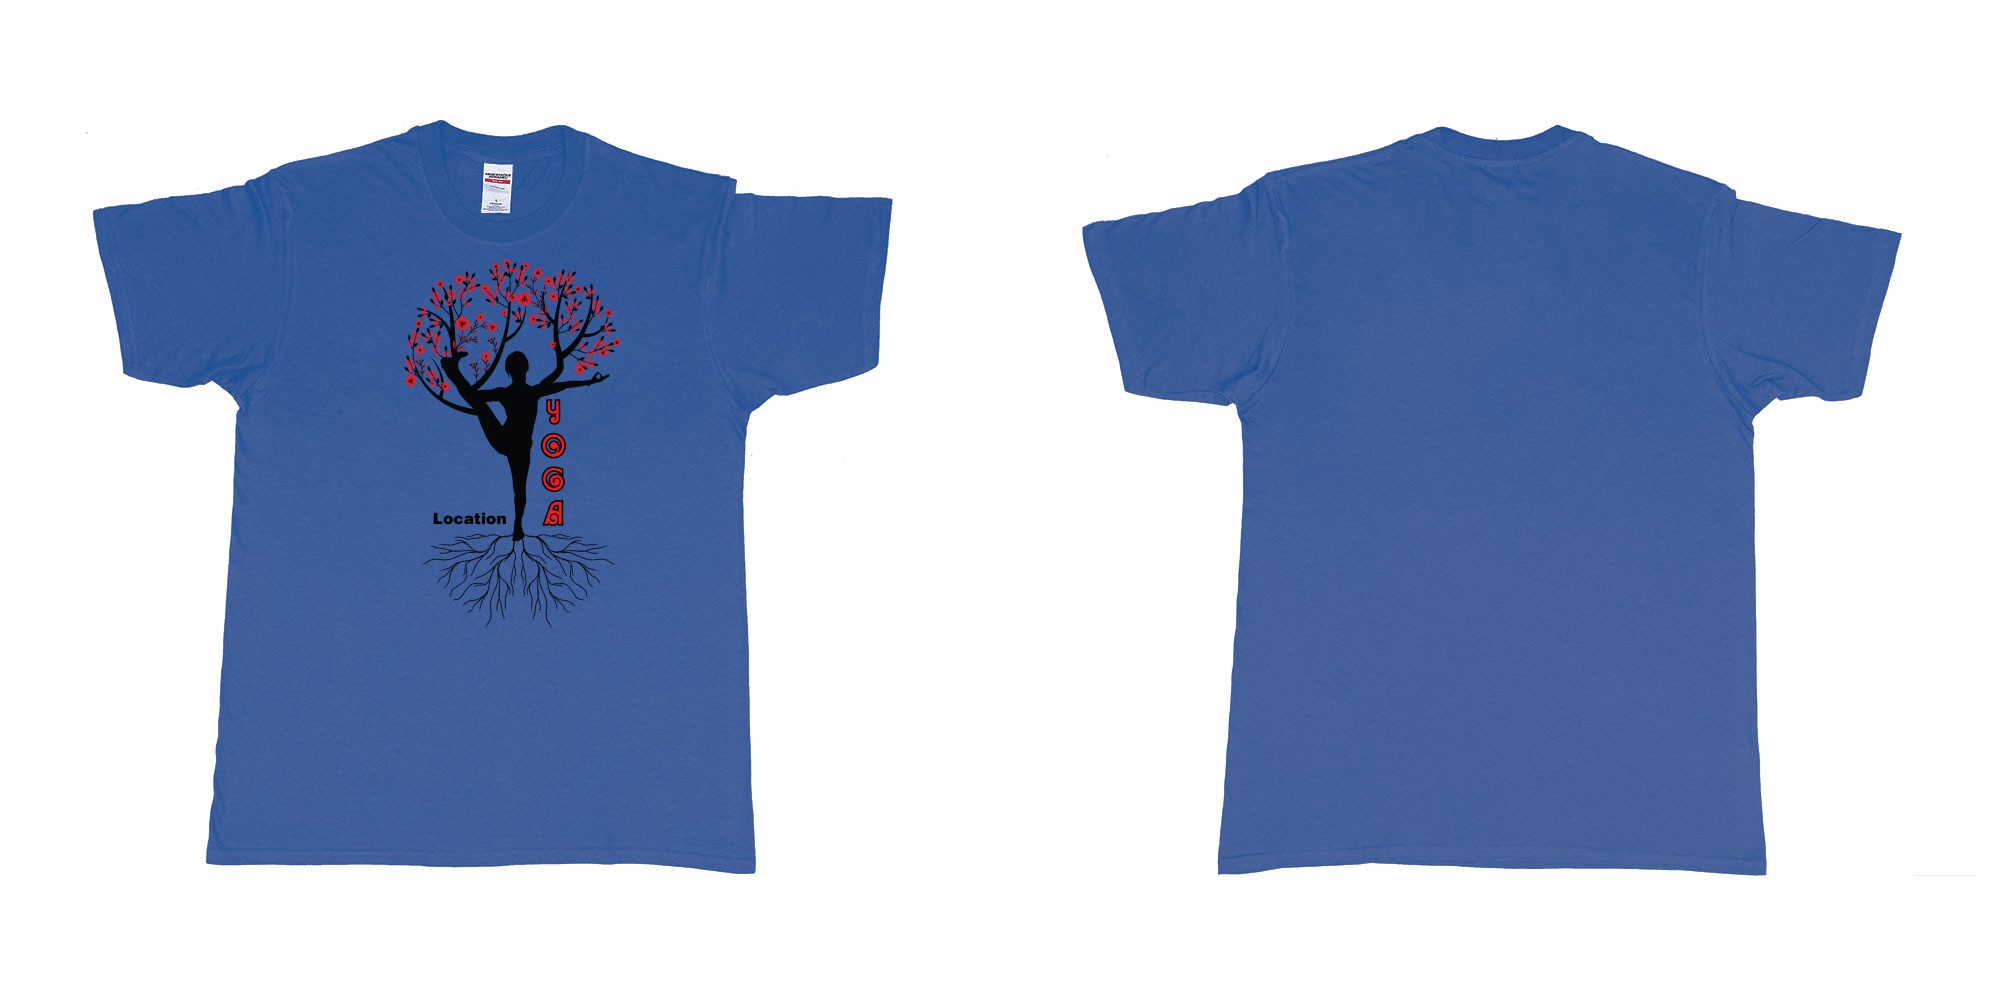 Custom tshirt design yoga tree of life is blooming own logo location design in fabric color royal-blue choice your own text made in Bali by The Pirate Way